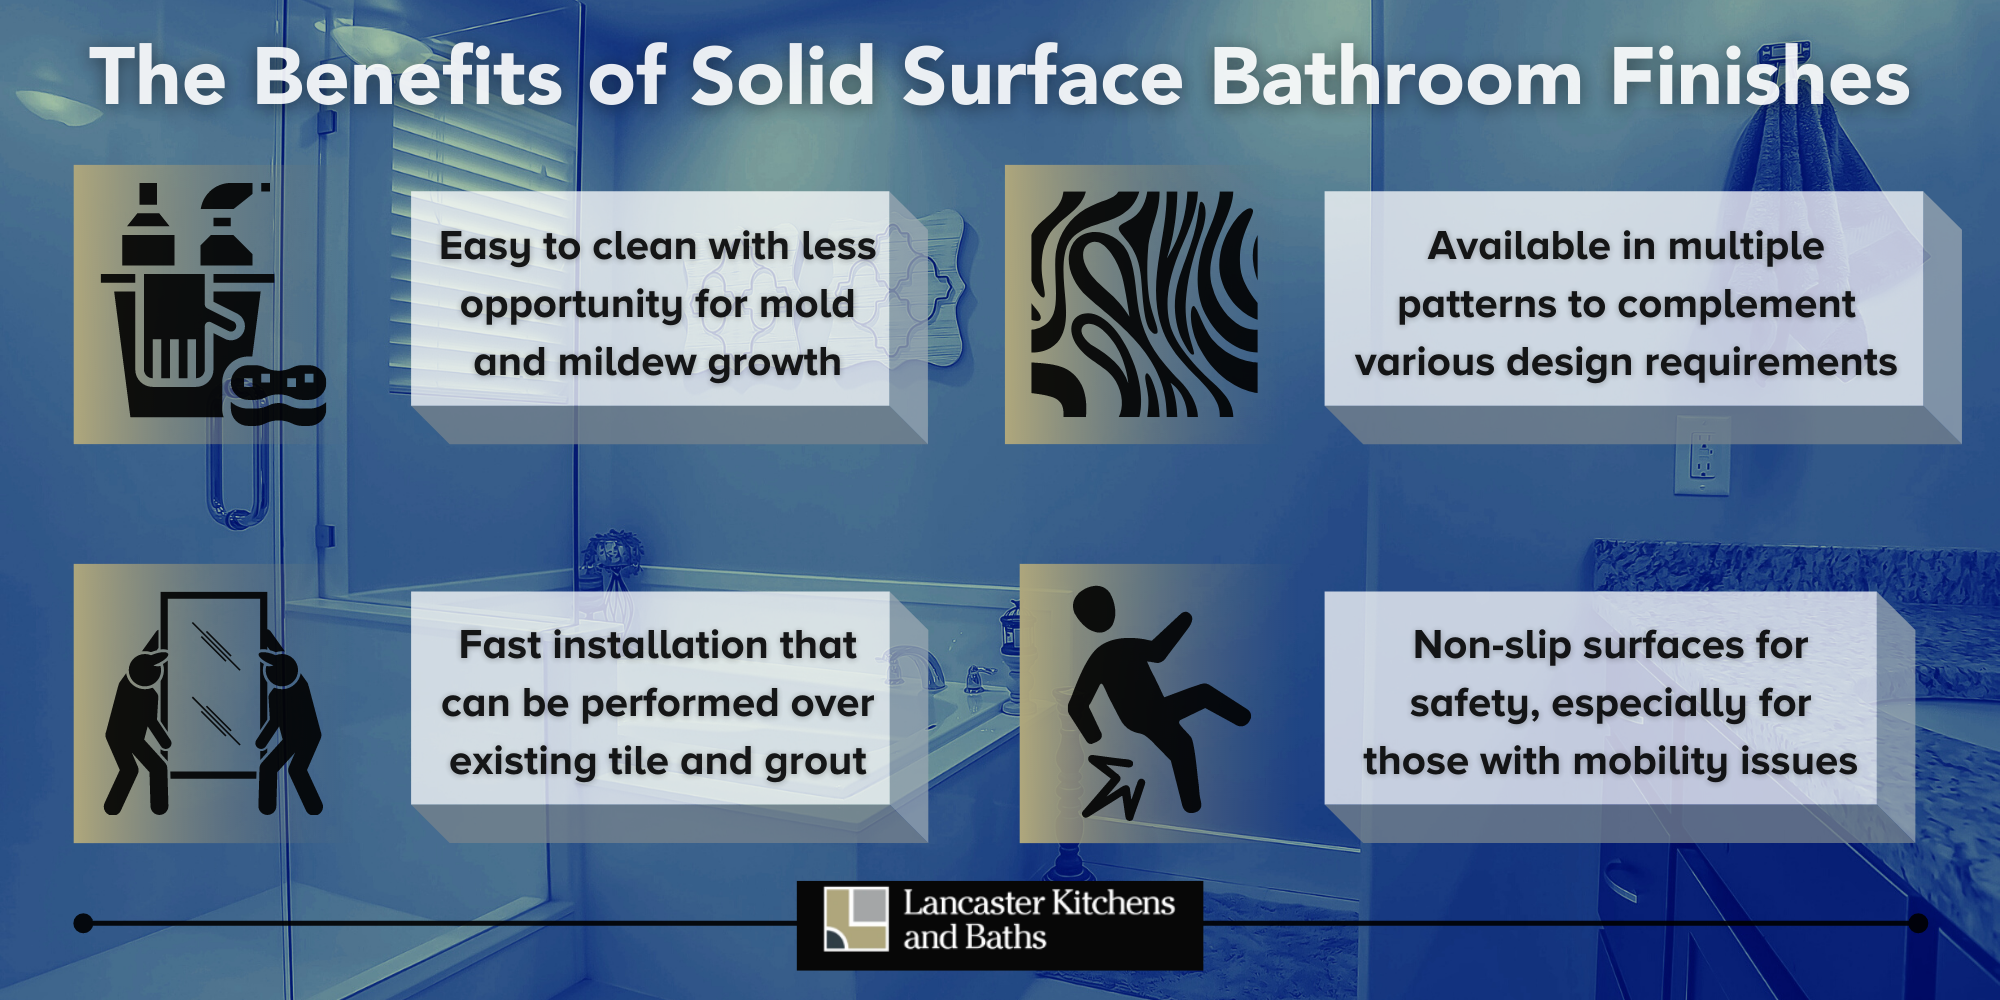 An infographic displaying the benefits of solid surface finishes in bathrooms